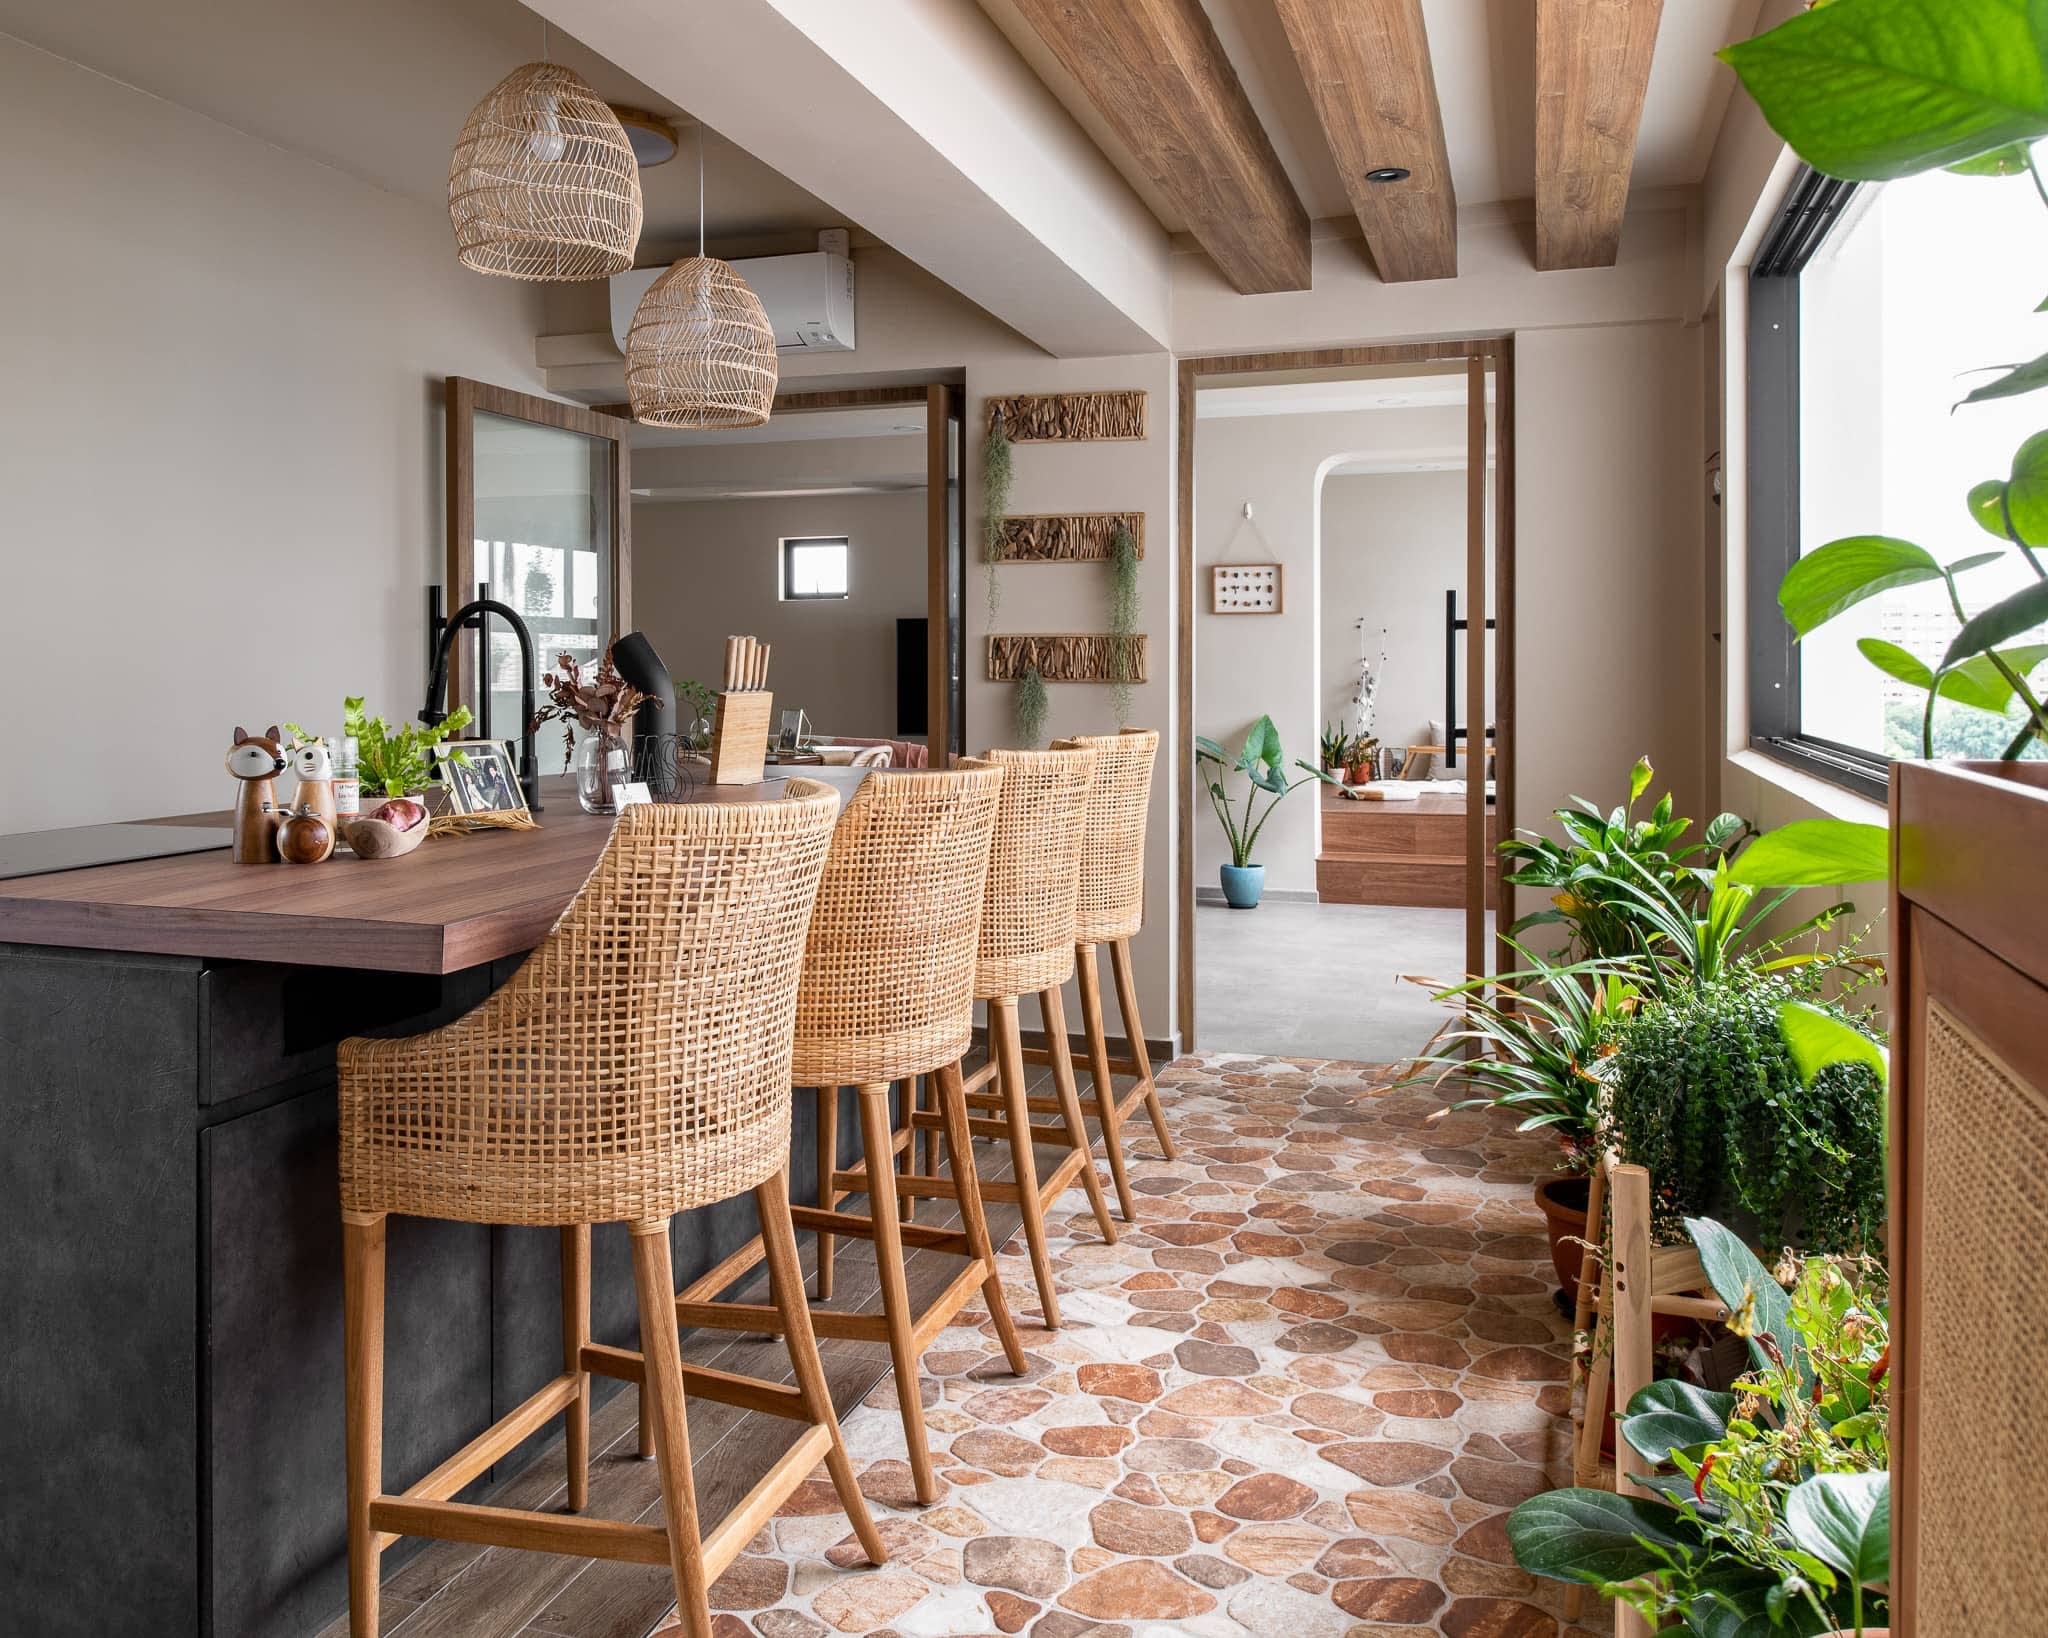 This 5-Room Resale Flat Now Looks Like A Stunning Bali Resort Villa After An $80K Renovation